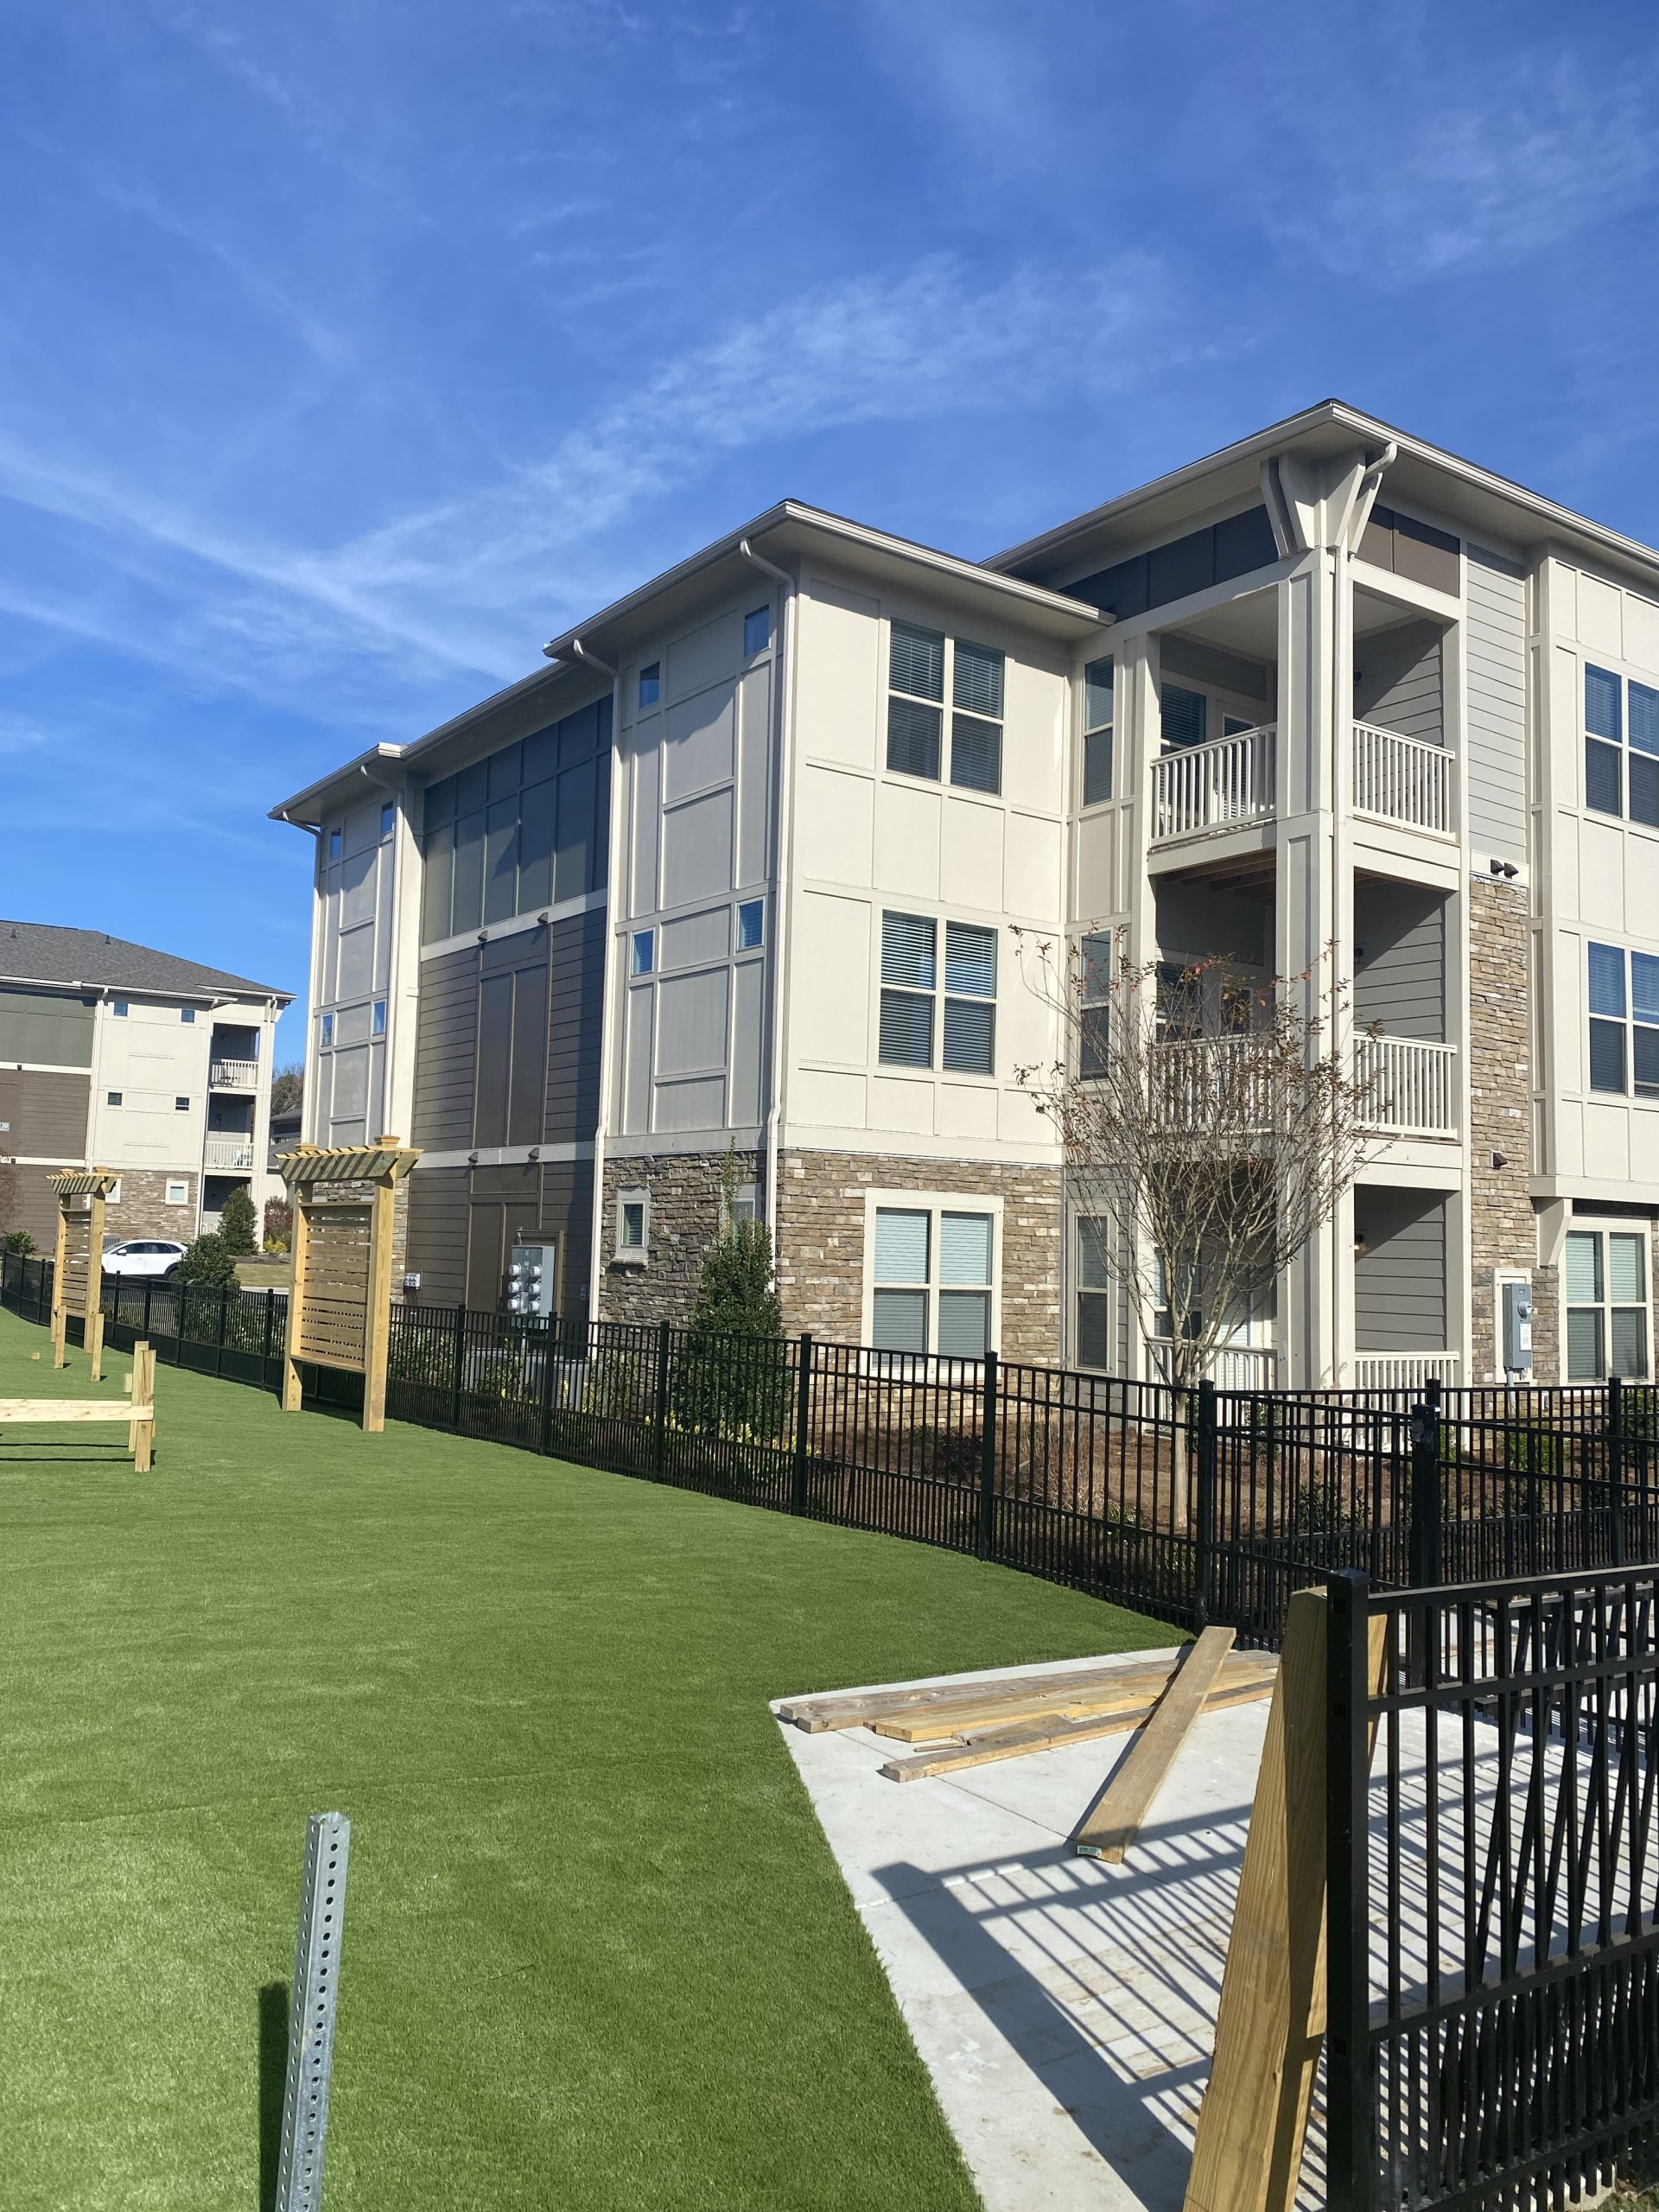 Commercial pet turf for apartments from SYNLawn